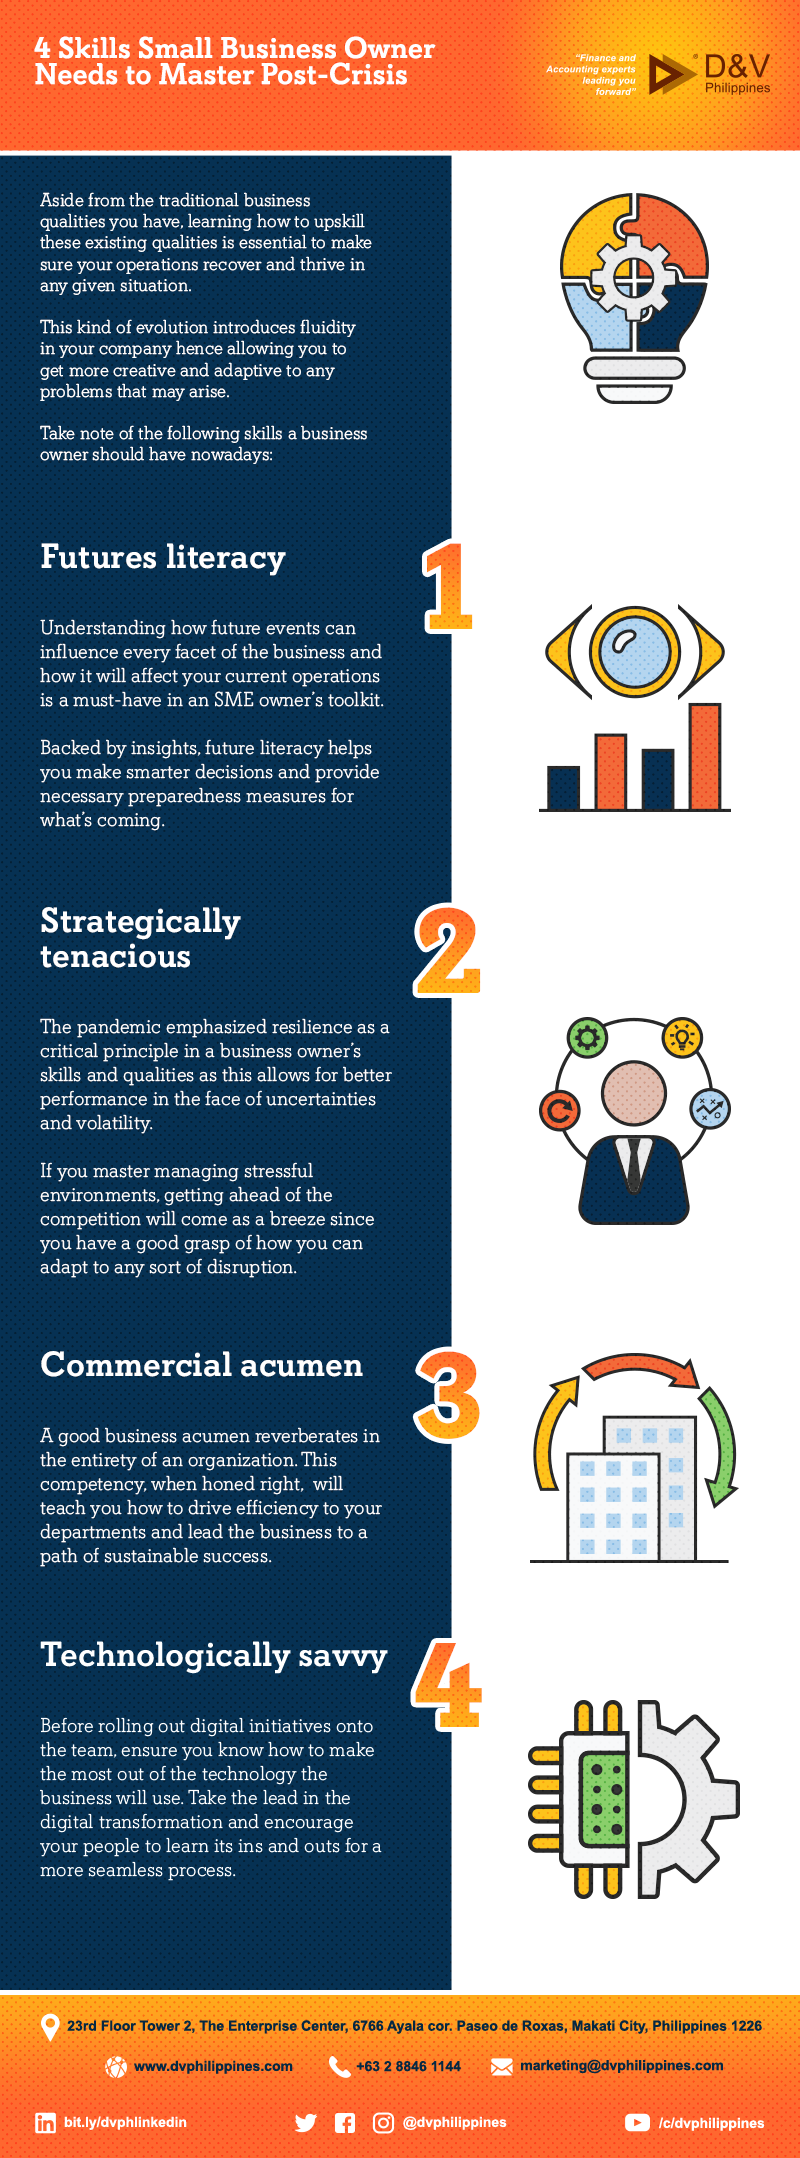 Infog_W_C_Title_4-Skills-Small-Business-Owner-Needs-to-Master-Post-CrisisMain